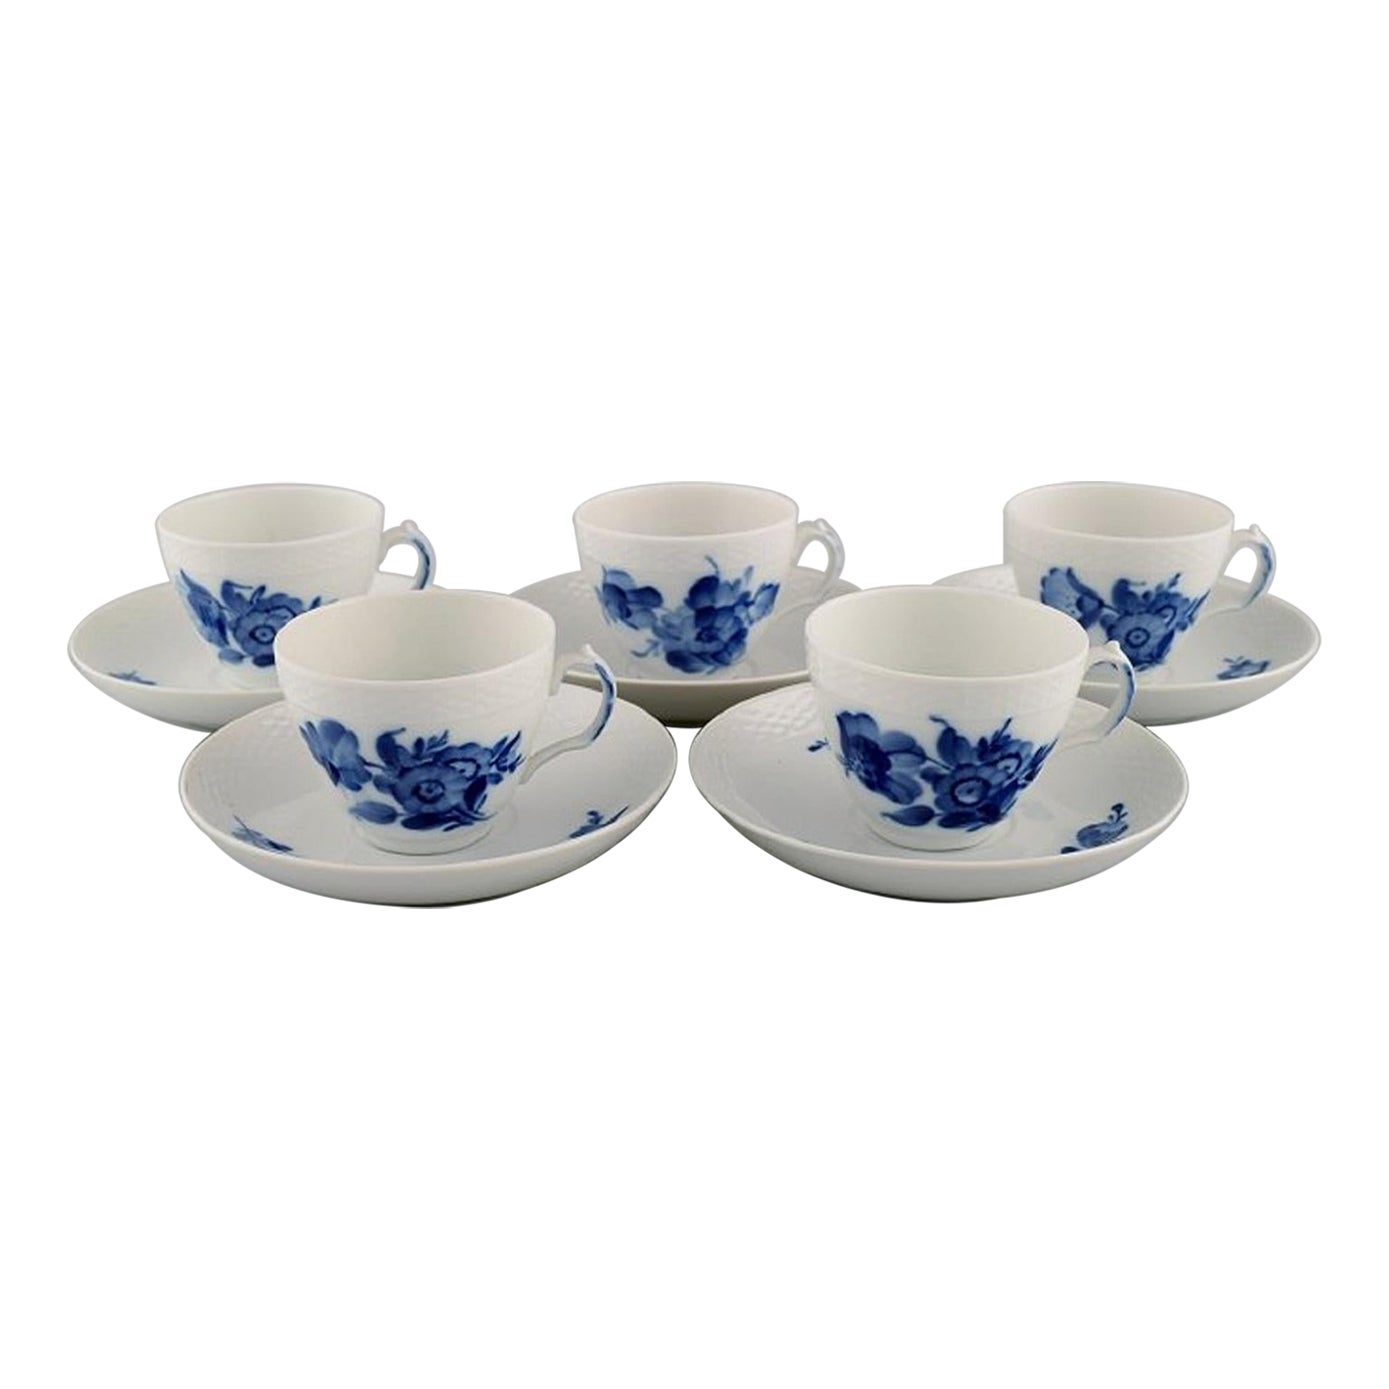 Five Royal Copenhagen Blue Flower Braided Coffee Cups with Saucers, Mid 20th C